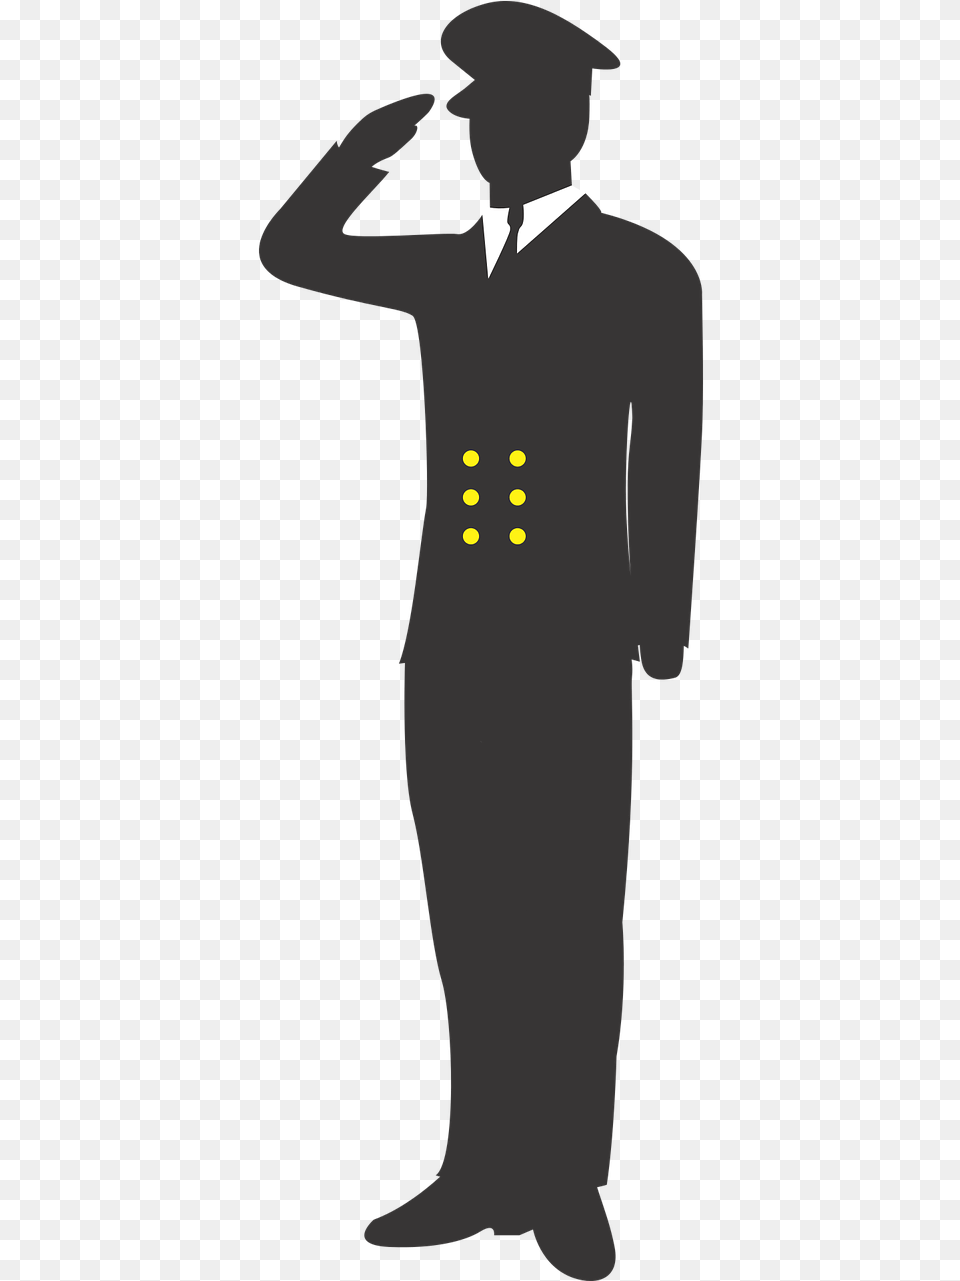 Sailor Salute Soldier Military Personnel Clip Art Soldiers Silhouette Salute, Clothing, Formal Wear, Suit, Man Free Transparent Png